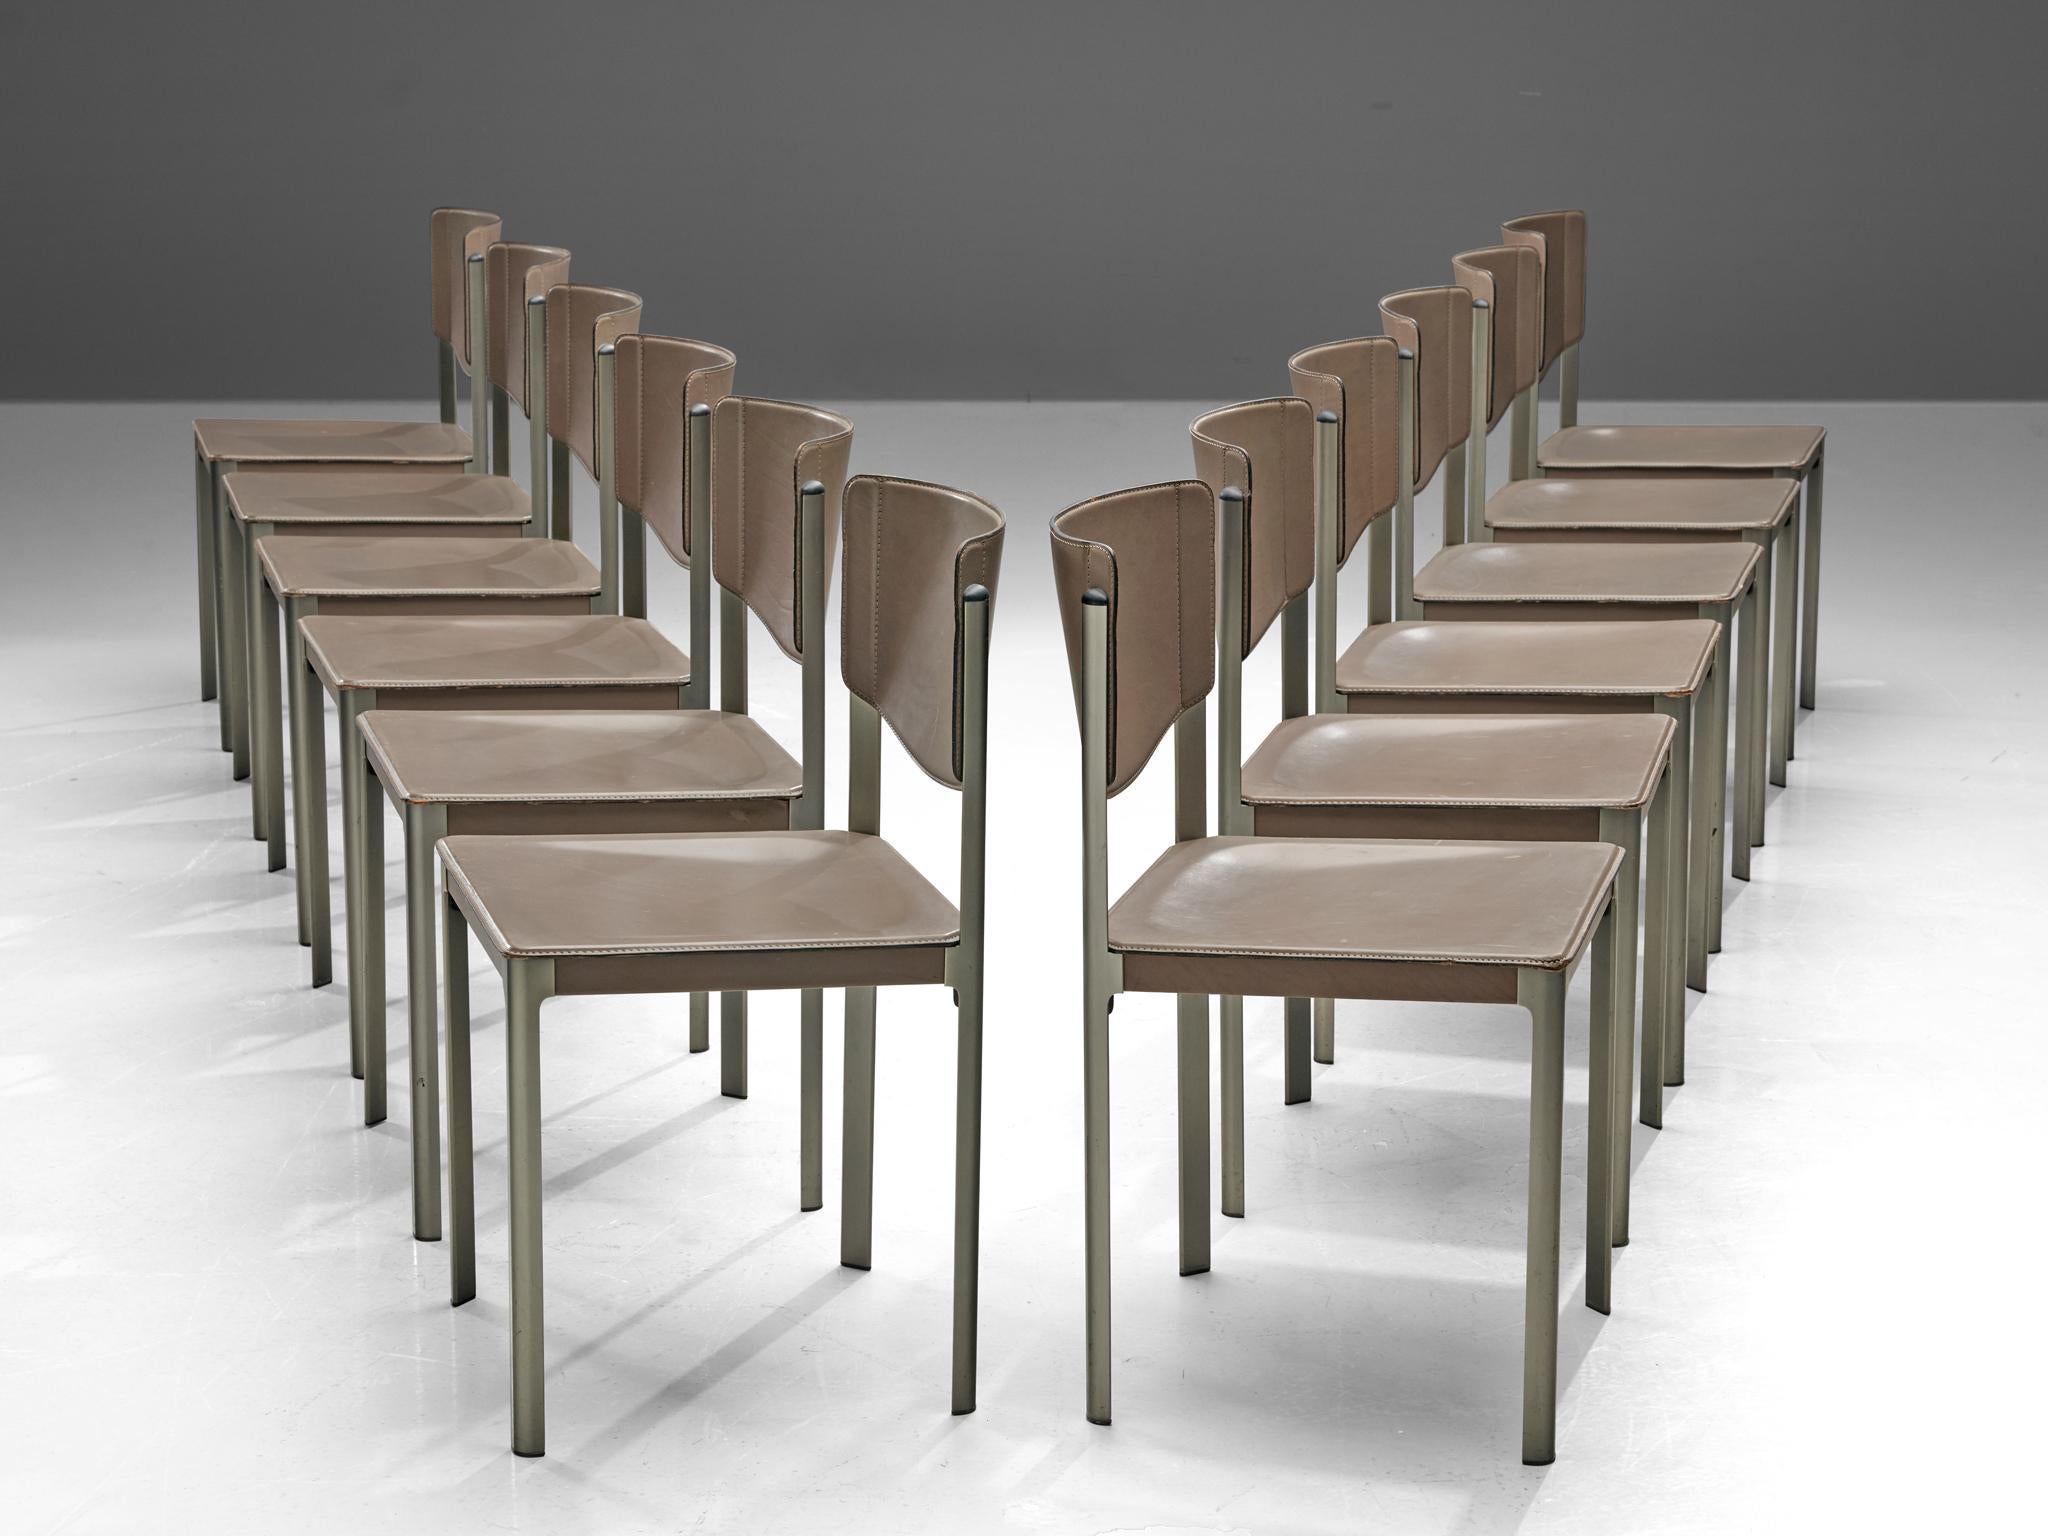 Matteo Grassi, set of twelve dining chairs, leather, steel, Italy, 1980s

These sophisticated grey leather chairs by Matteo Grassi feature a cubic design. The seat and base are upholstered in leather, leaving the metal frame bare. The leather is in